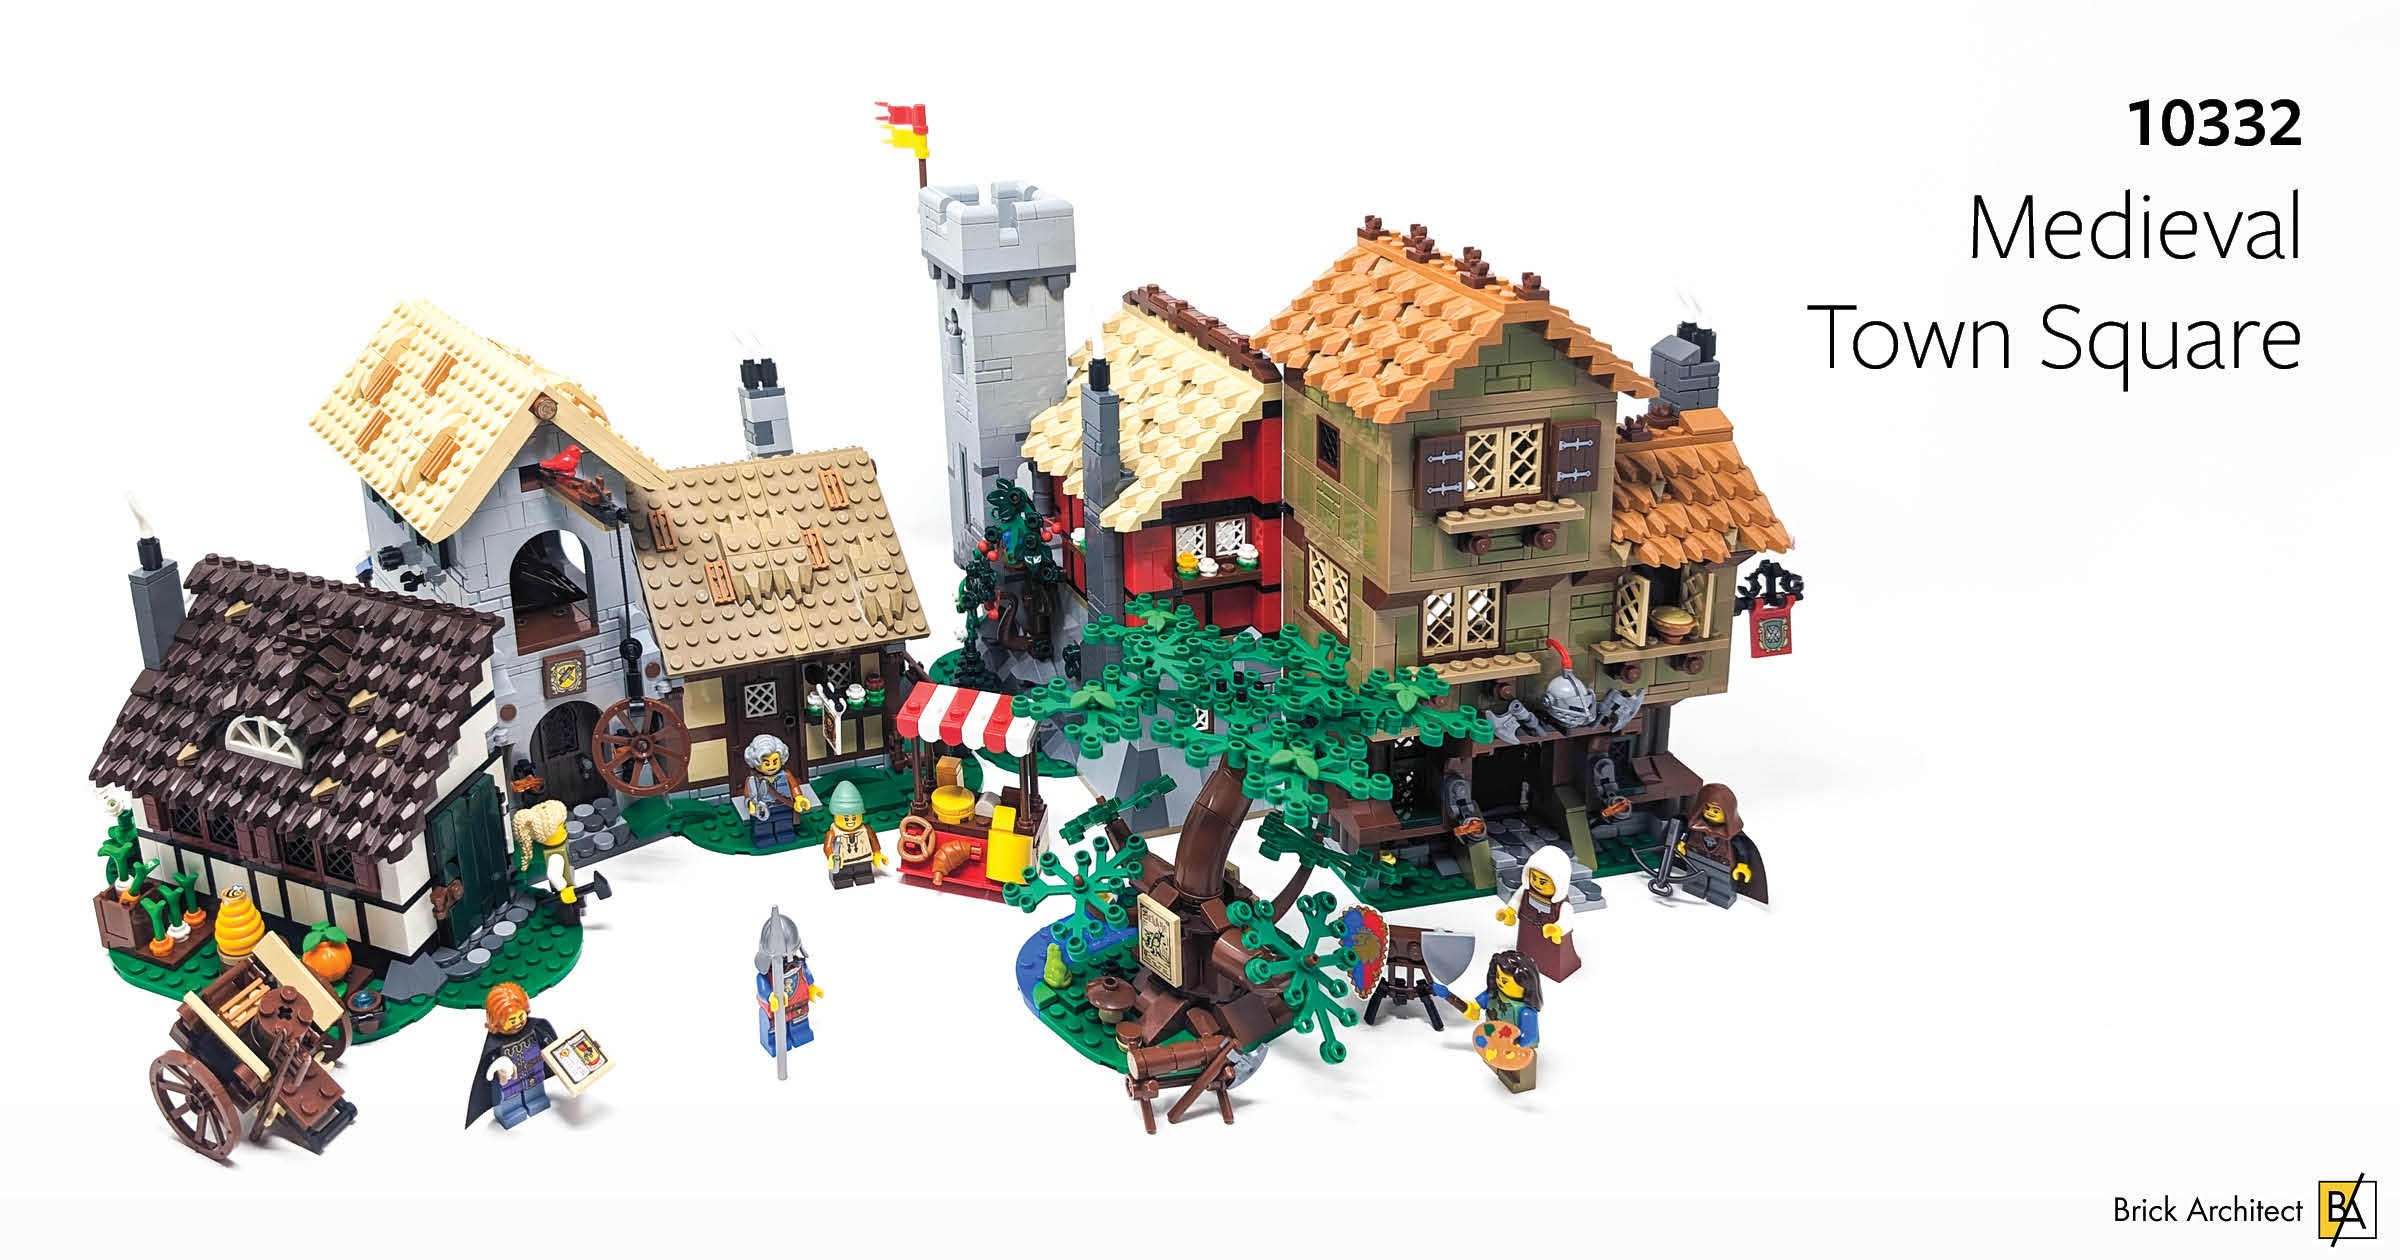 While I think the Technic set is a better set, LEGO Castle fans are eager to learn more about #10332 Medieval Town Square.